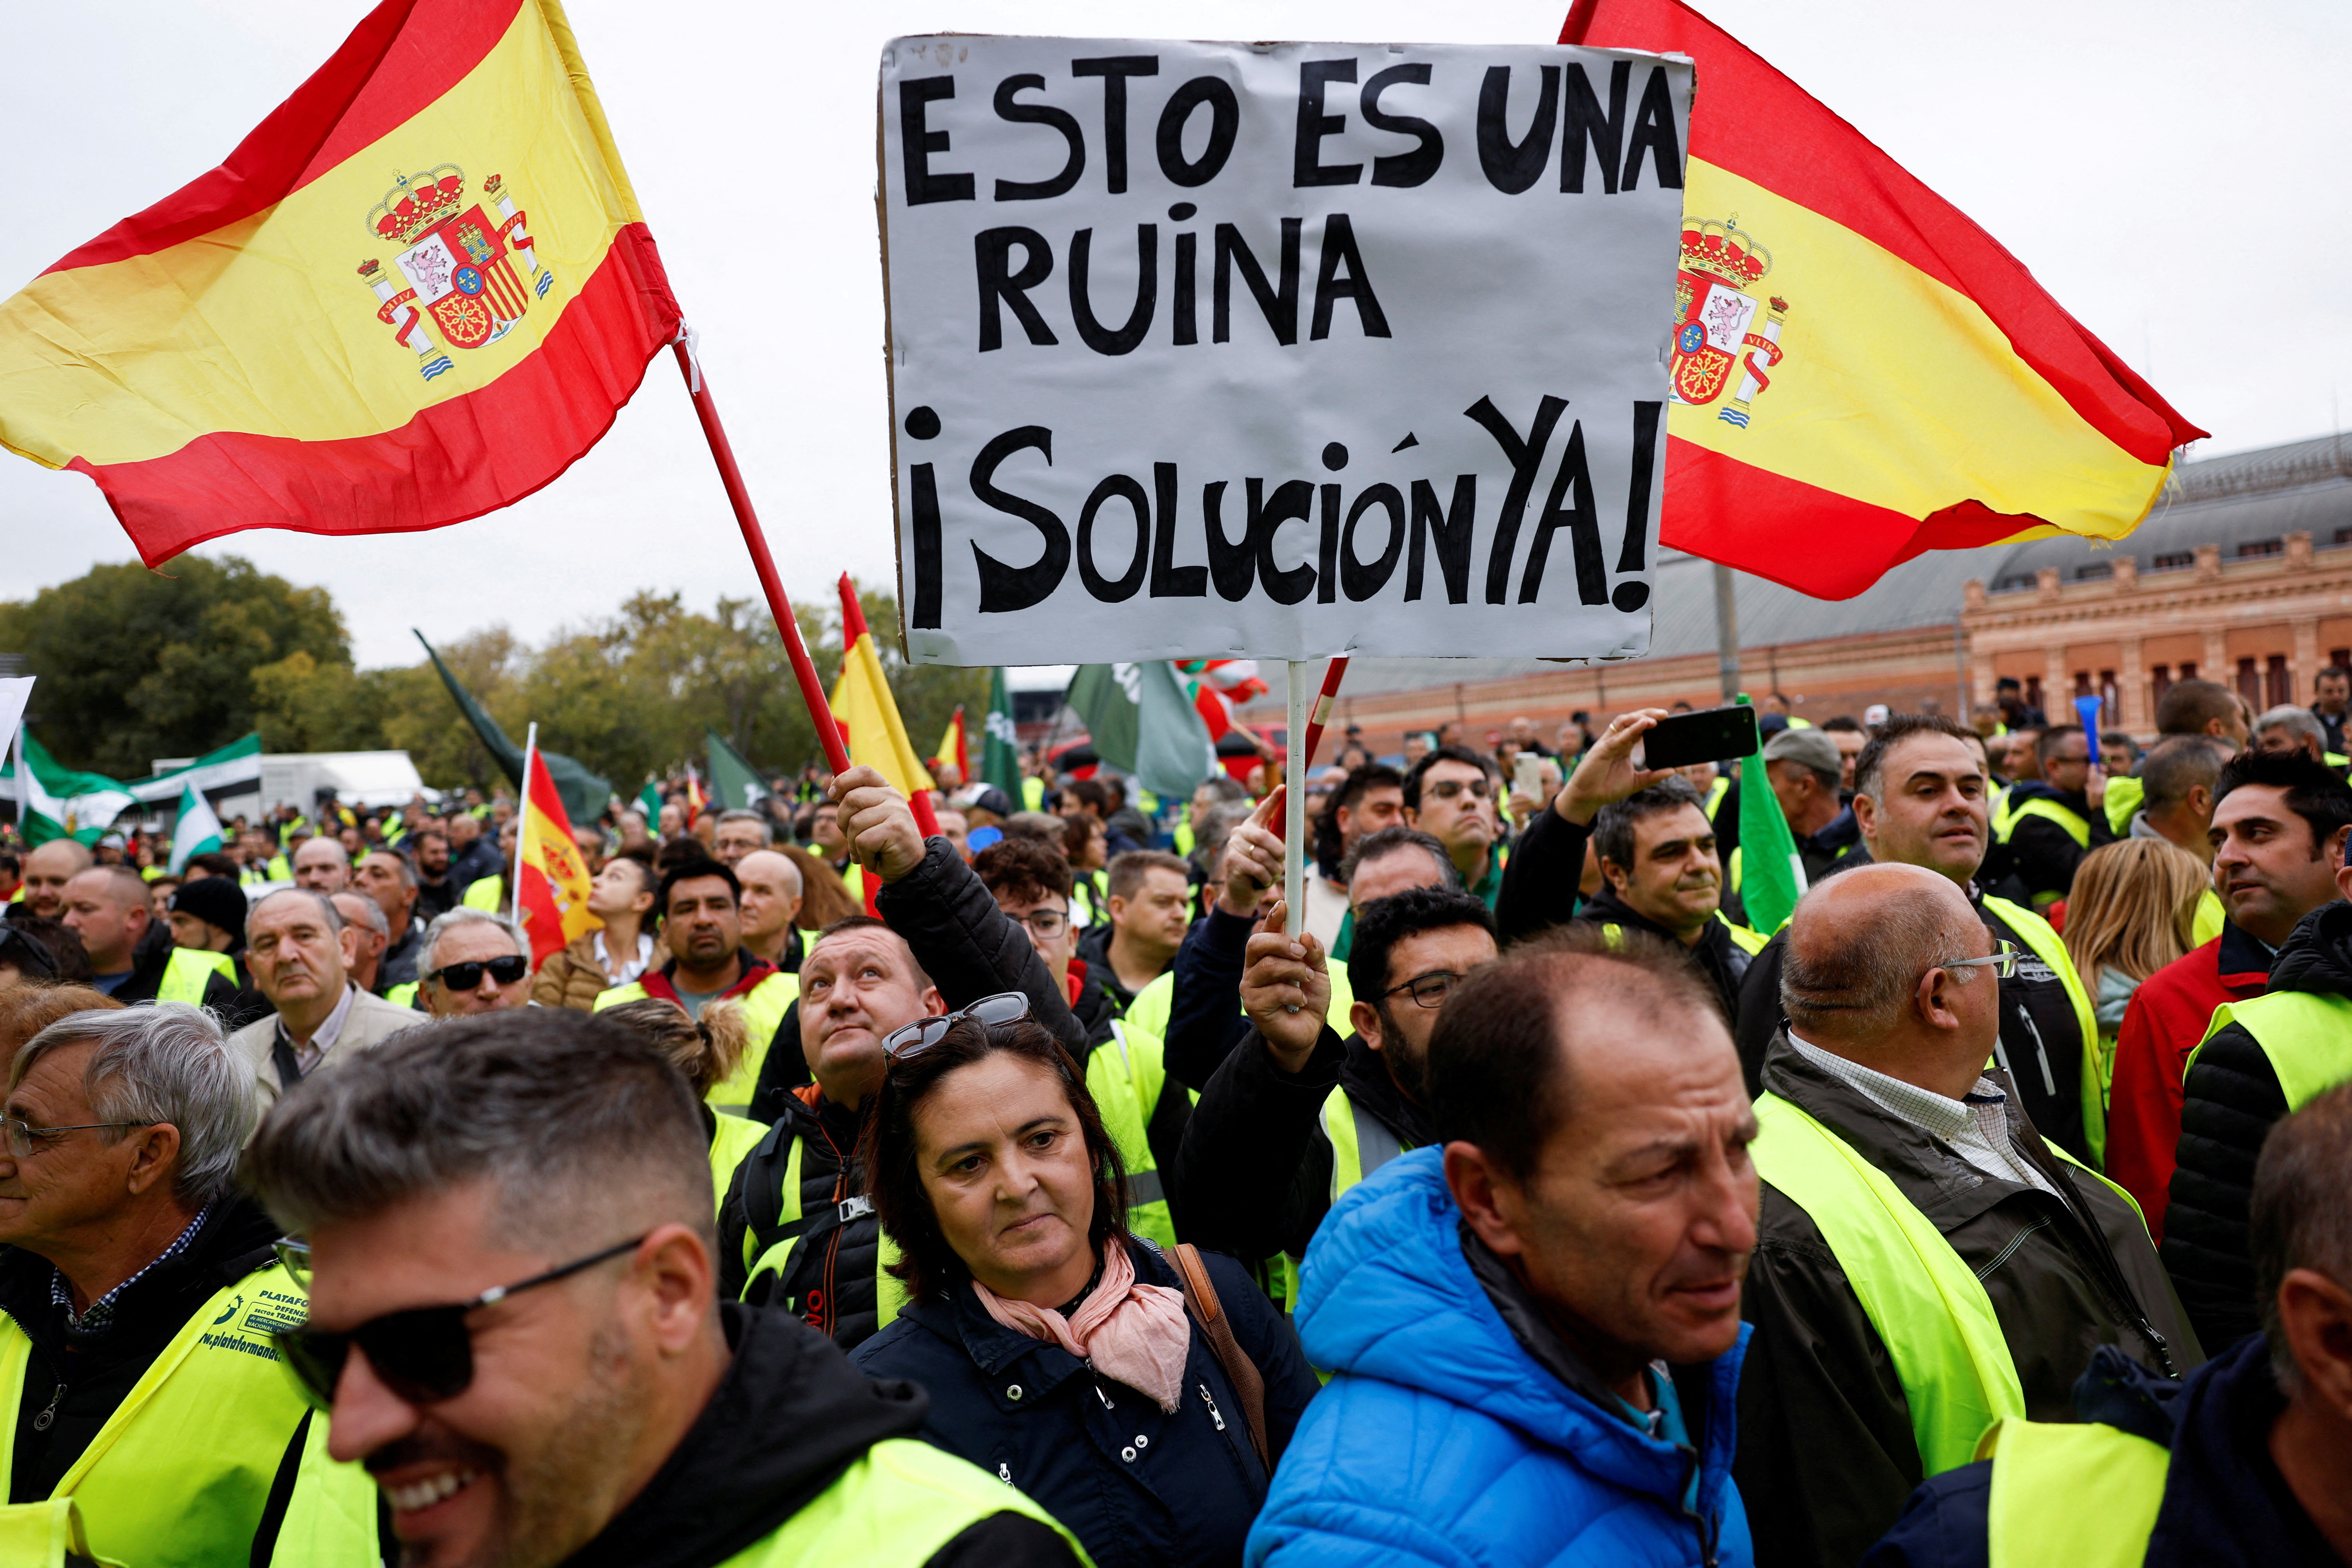 Spanish truckers and farmers march to protest over working conditions and fair prices in Madrid